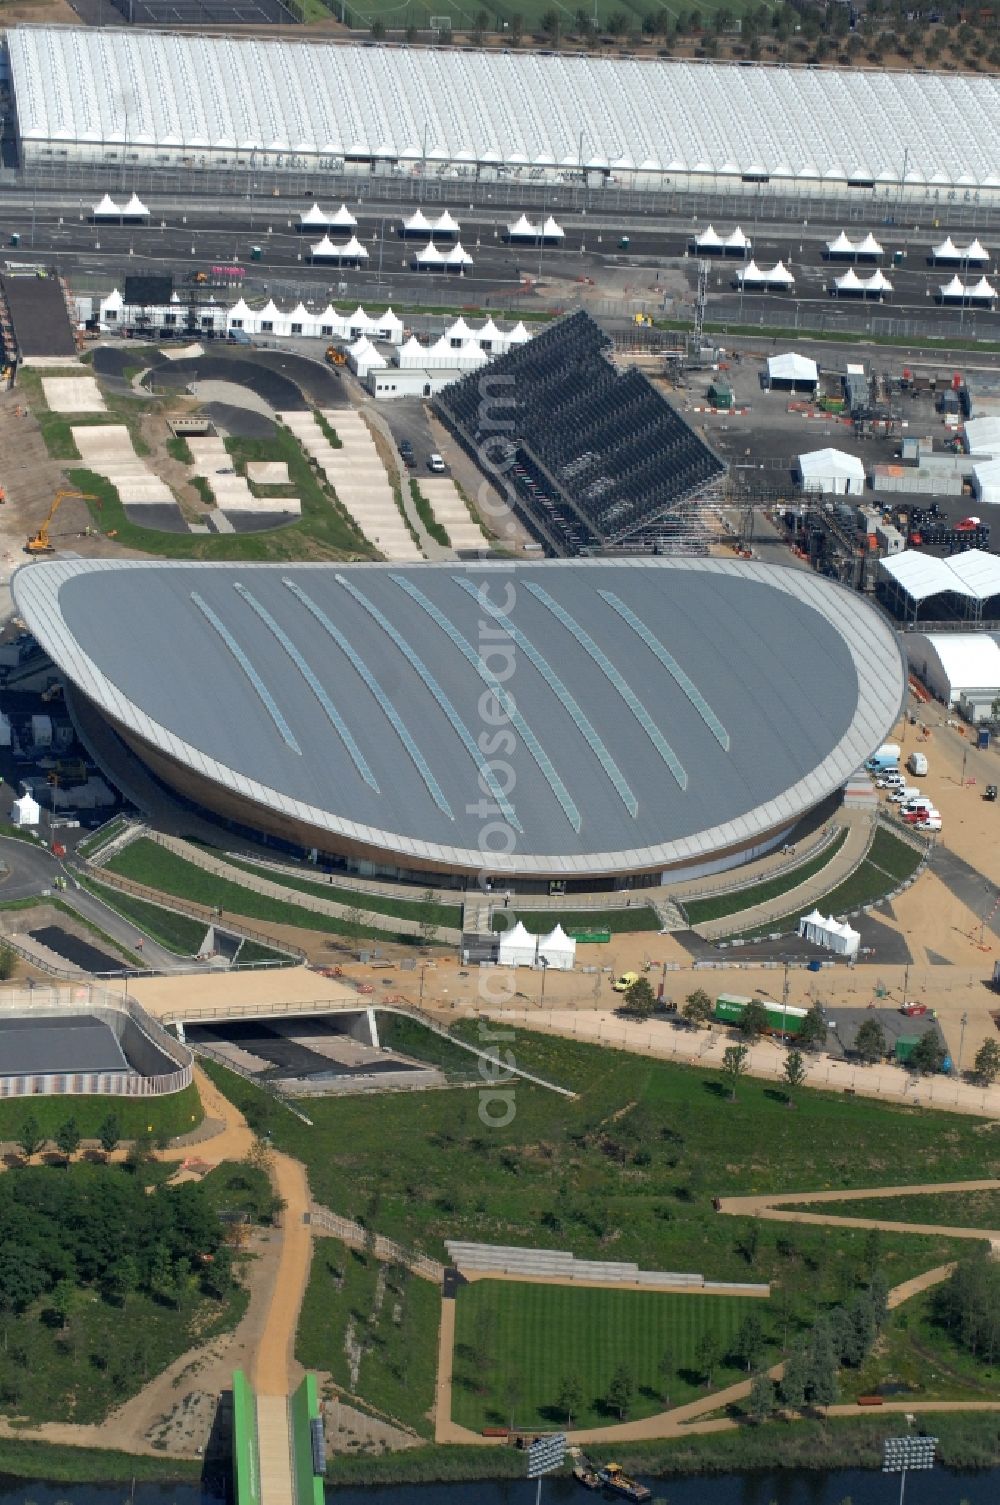 London from the bird's eye view: The London Velopark is a cycling centre in Leyton in east London. It is one of the permanent Olympic and Paralympic venues for the 2012 Games. The Velopark is at the northern end of Olympic Park. It has a velodrome and BMX racing track, which will be used for the Games in Great Britain